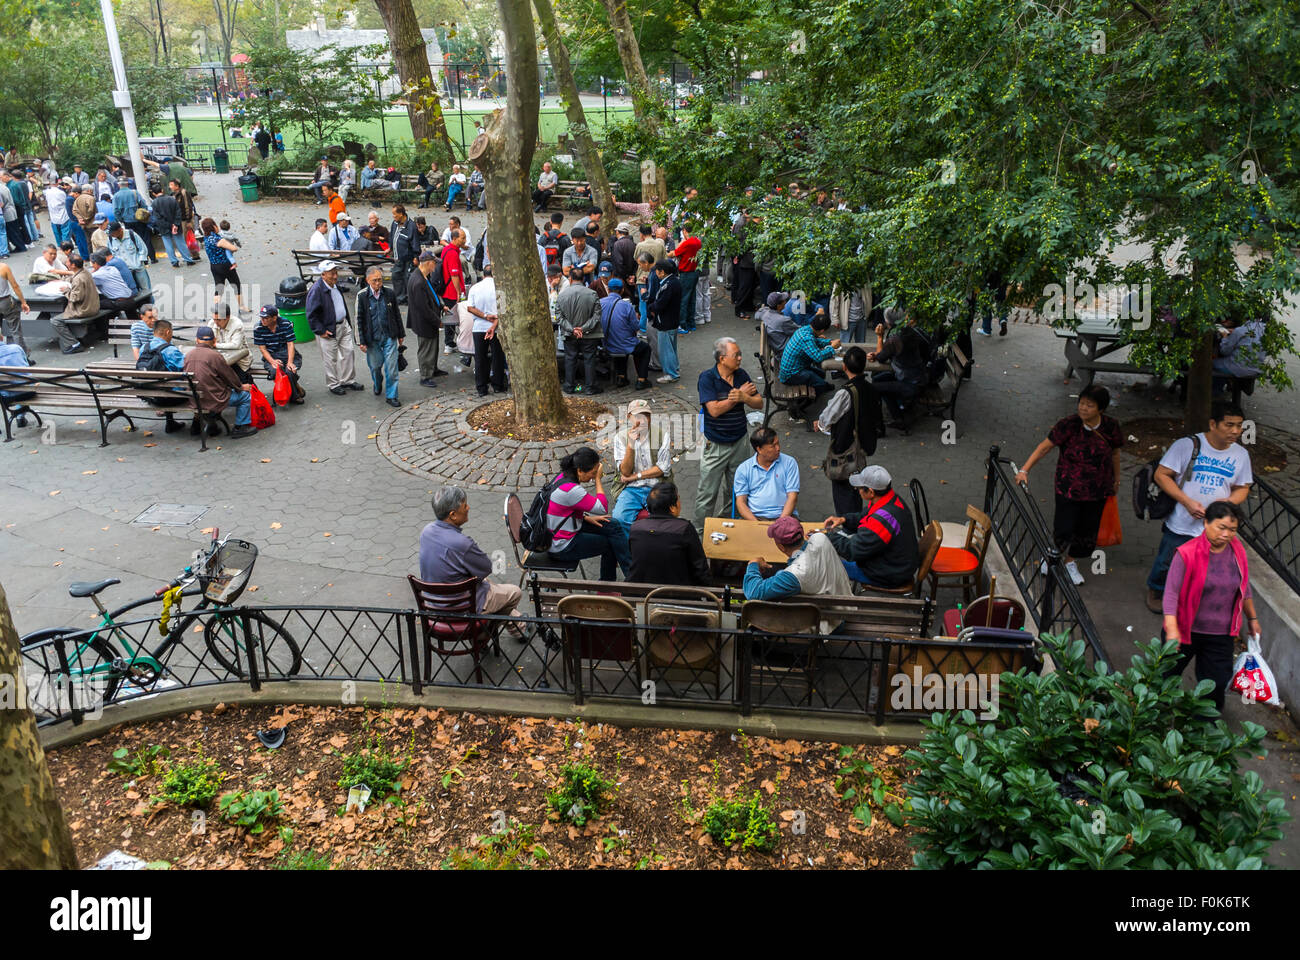 New York City, USA, Urban Playground Scenes, Chinatown District, Crowds of Chinese Seniors Hanging Out in Public Park Stock Photo